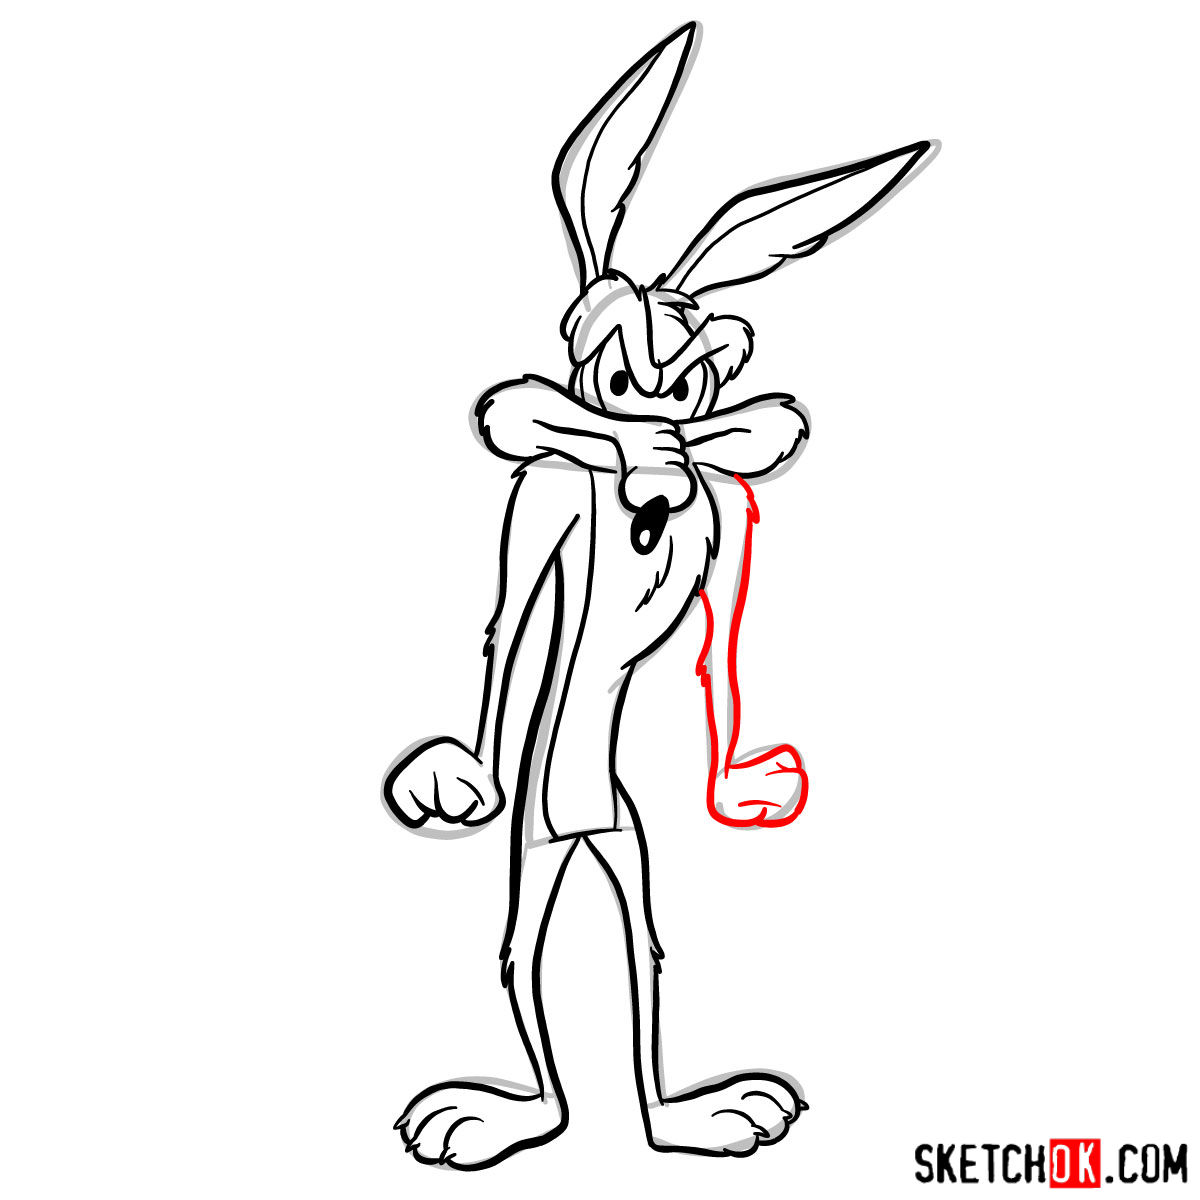 How to draw Wile E. Coyote - step 09